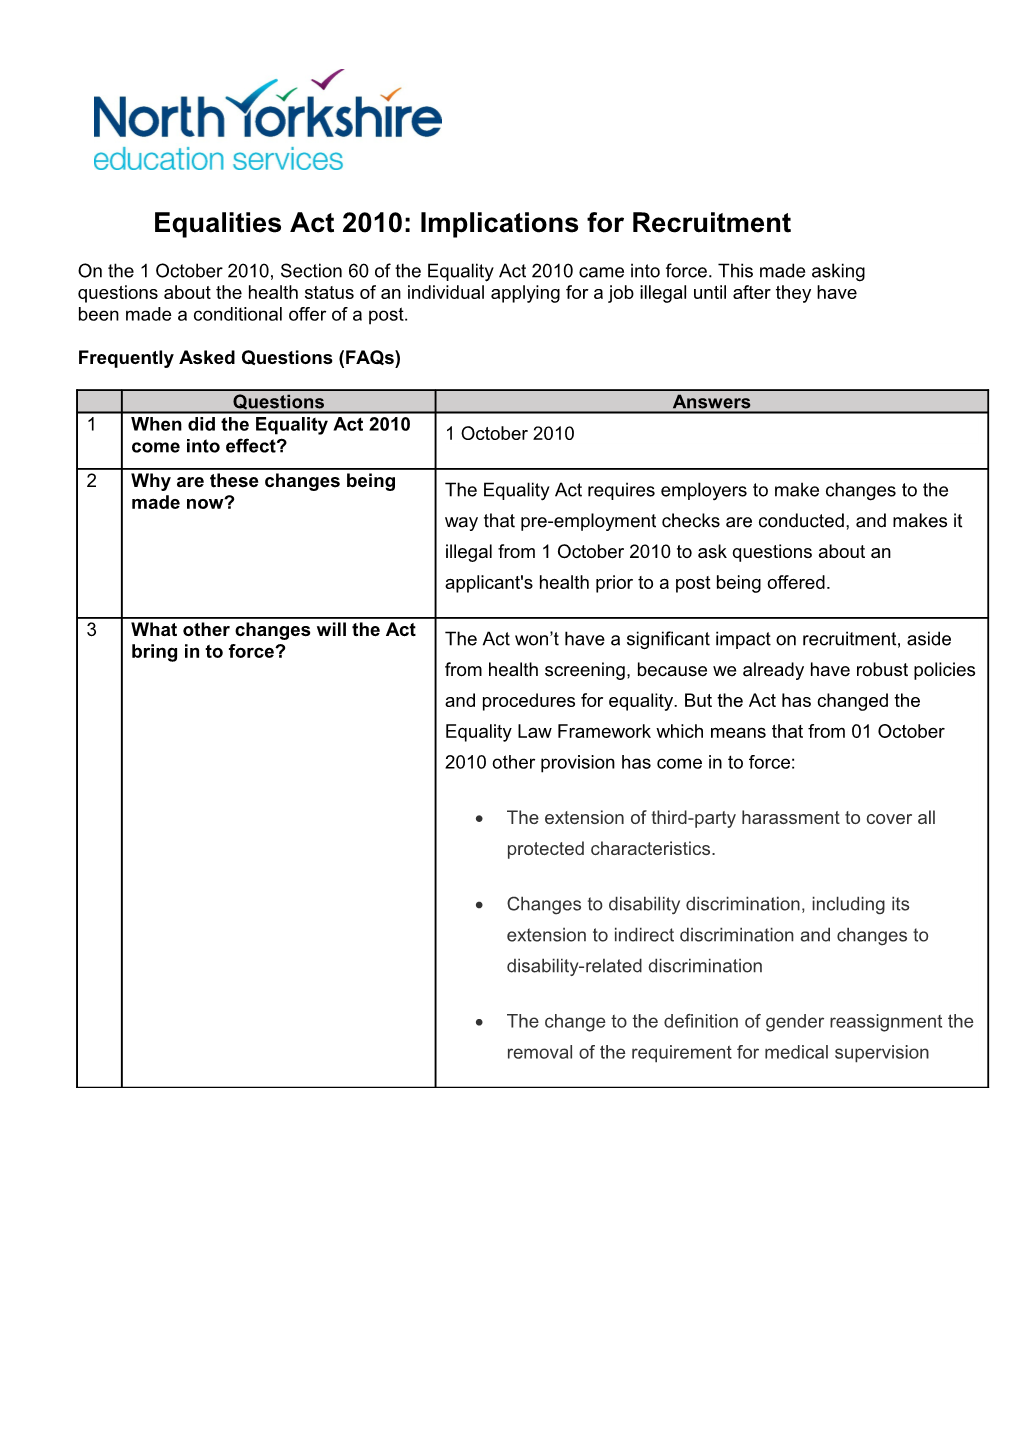 Equalities Act 2010 Faqs